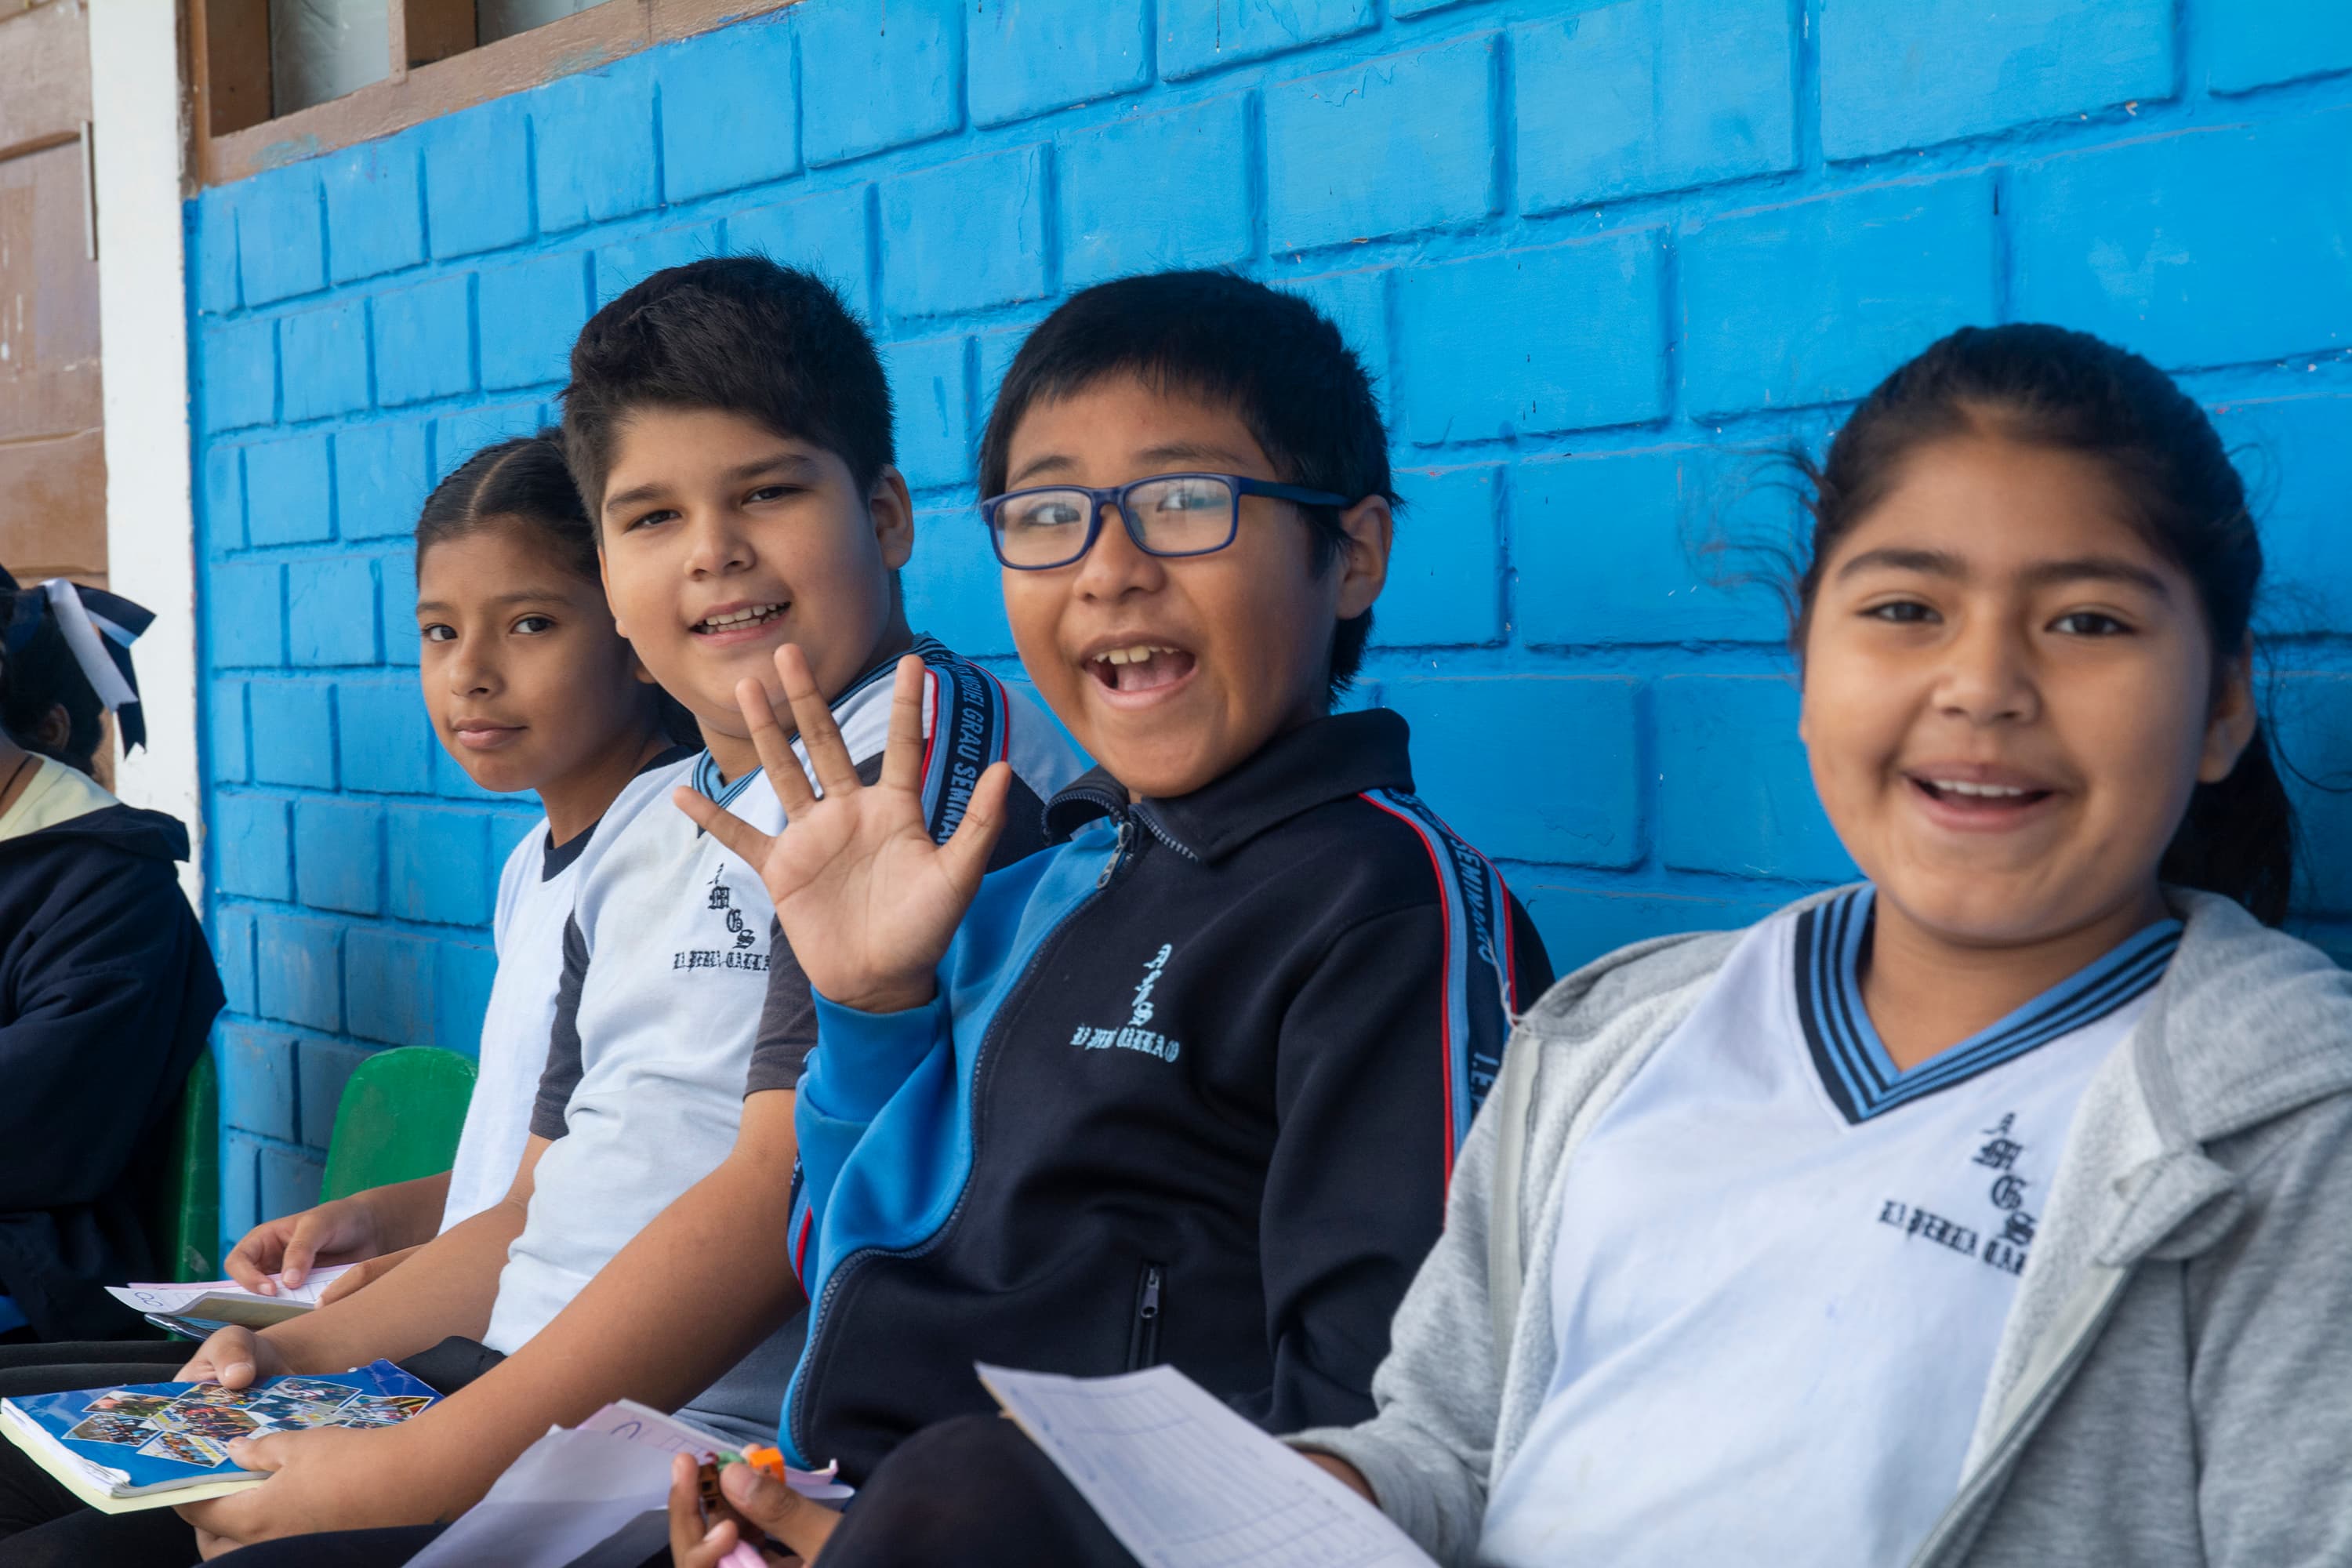 children in Peru happily smiling during a vision campaign